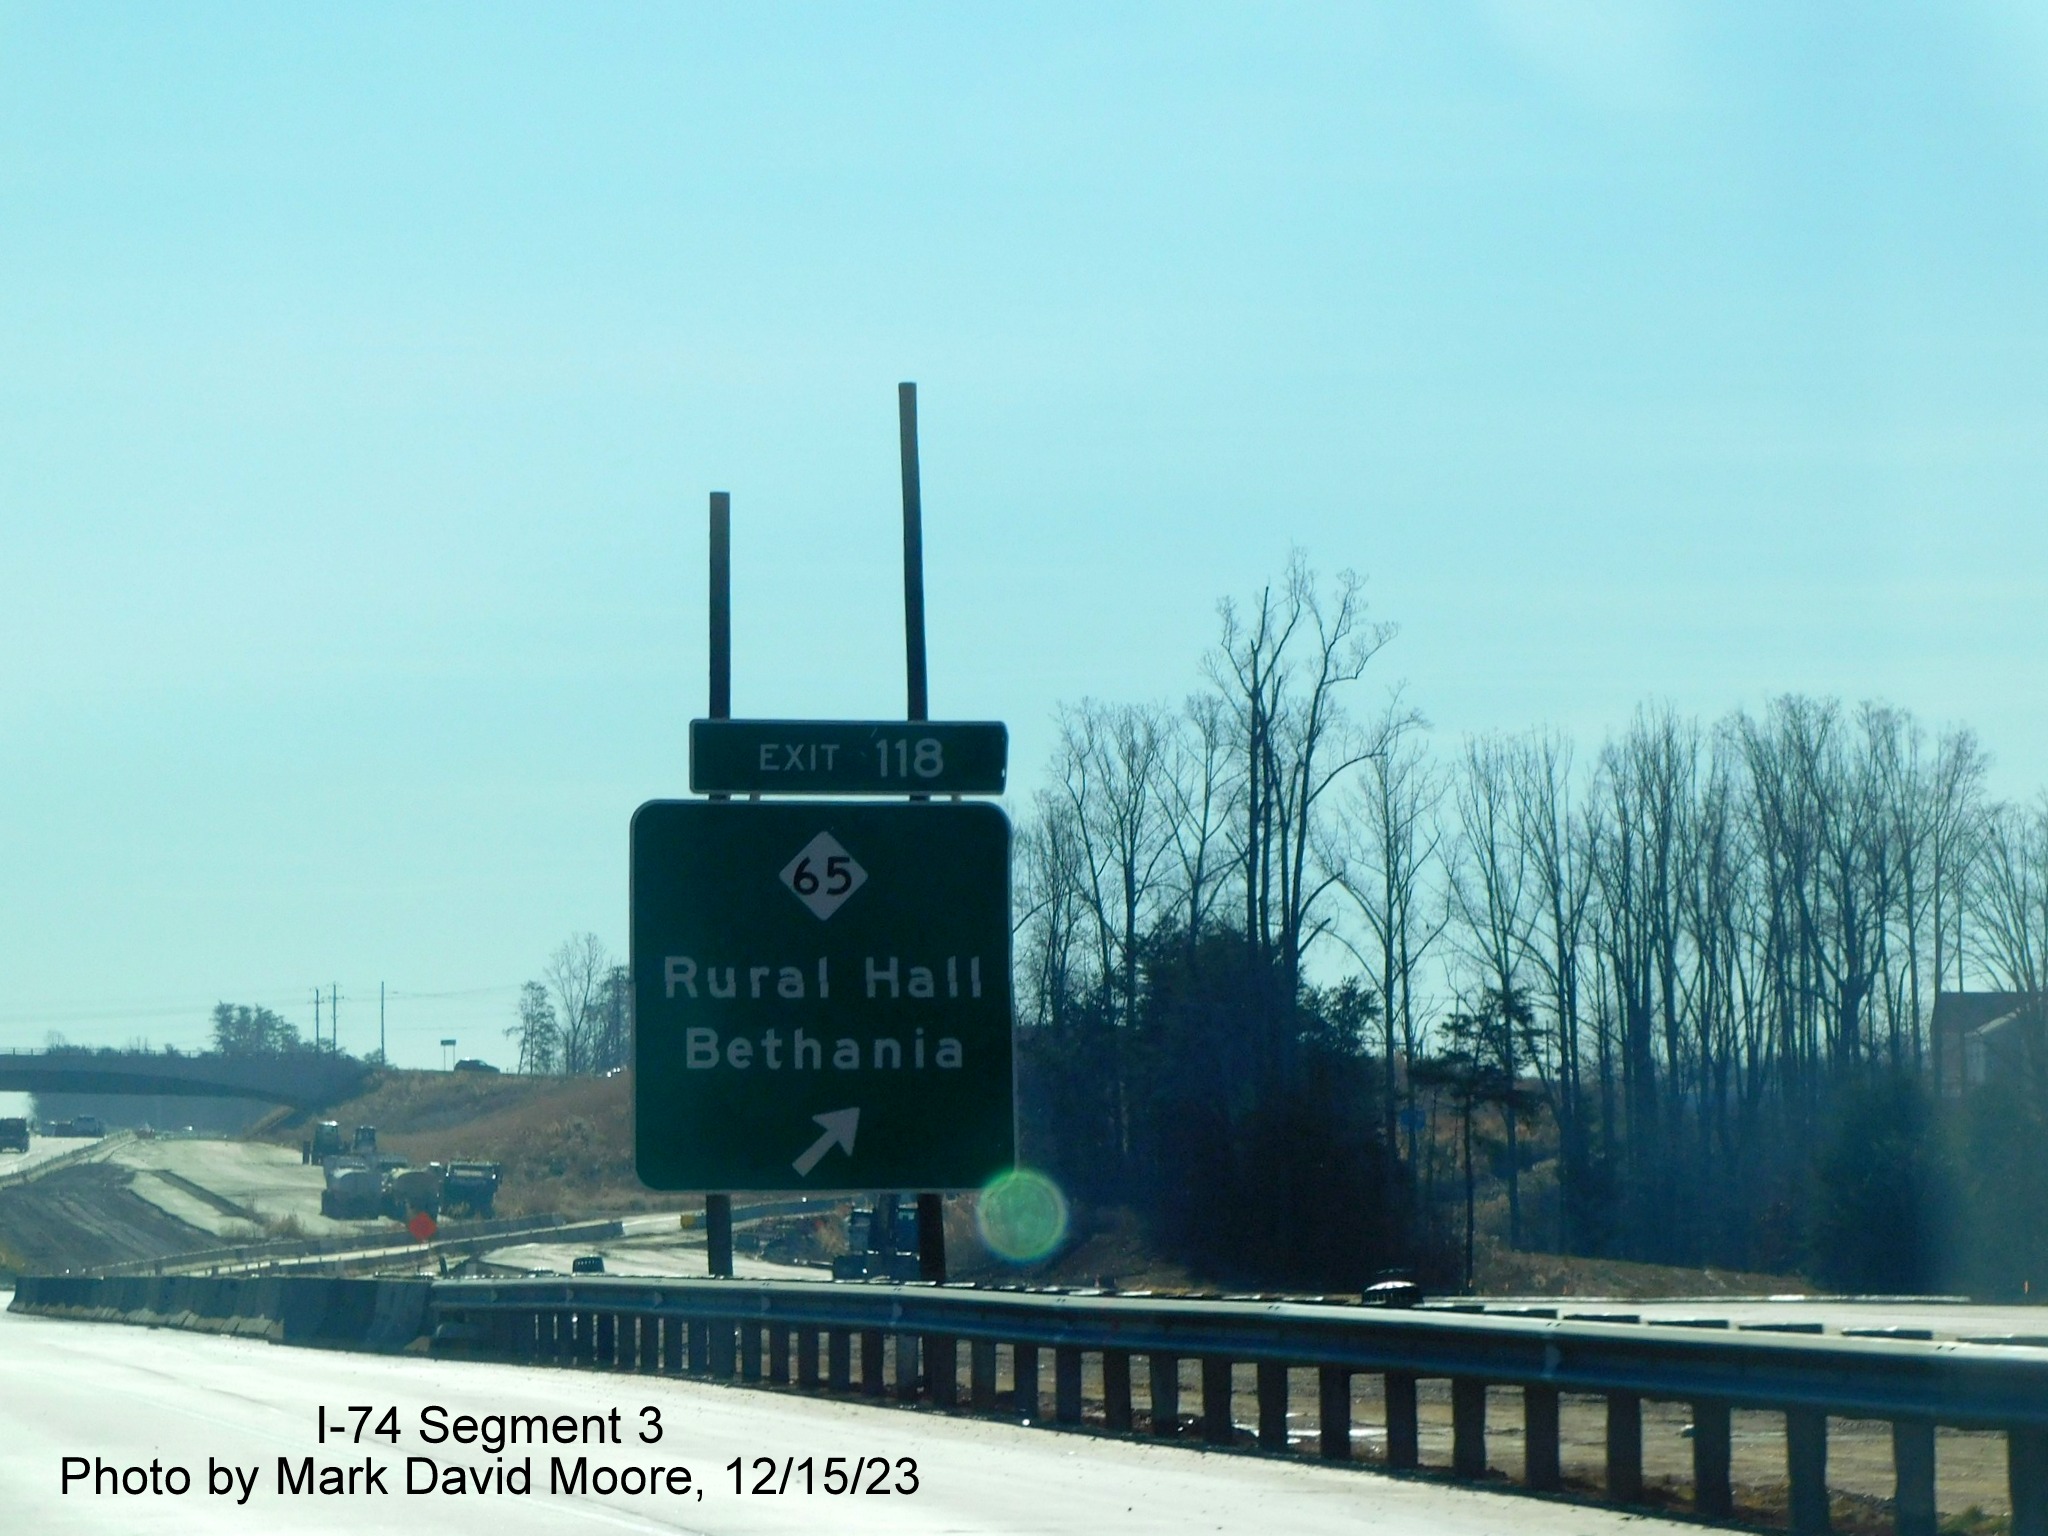 Image of ground mounted ramp sign for NC 65 exit on temporary eastbound lanes approaching the
        Winston-Salem Northern Beltway interchange in Rural Hall, by Mark David Moore, December 2023